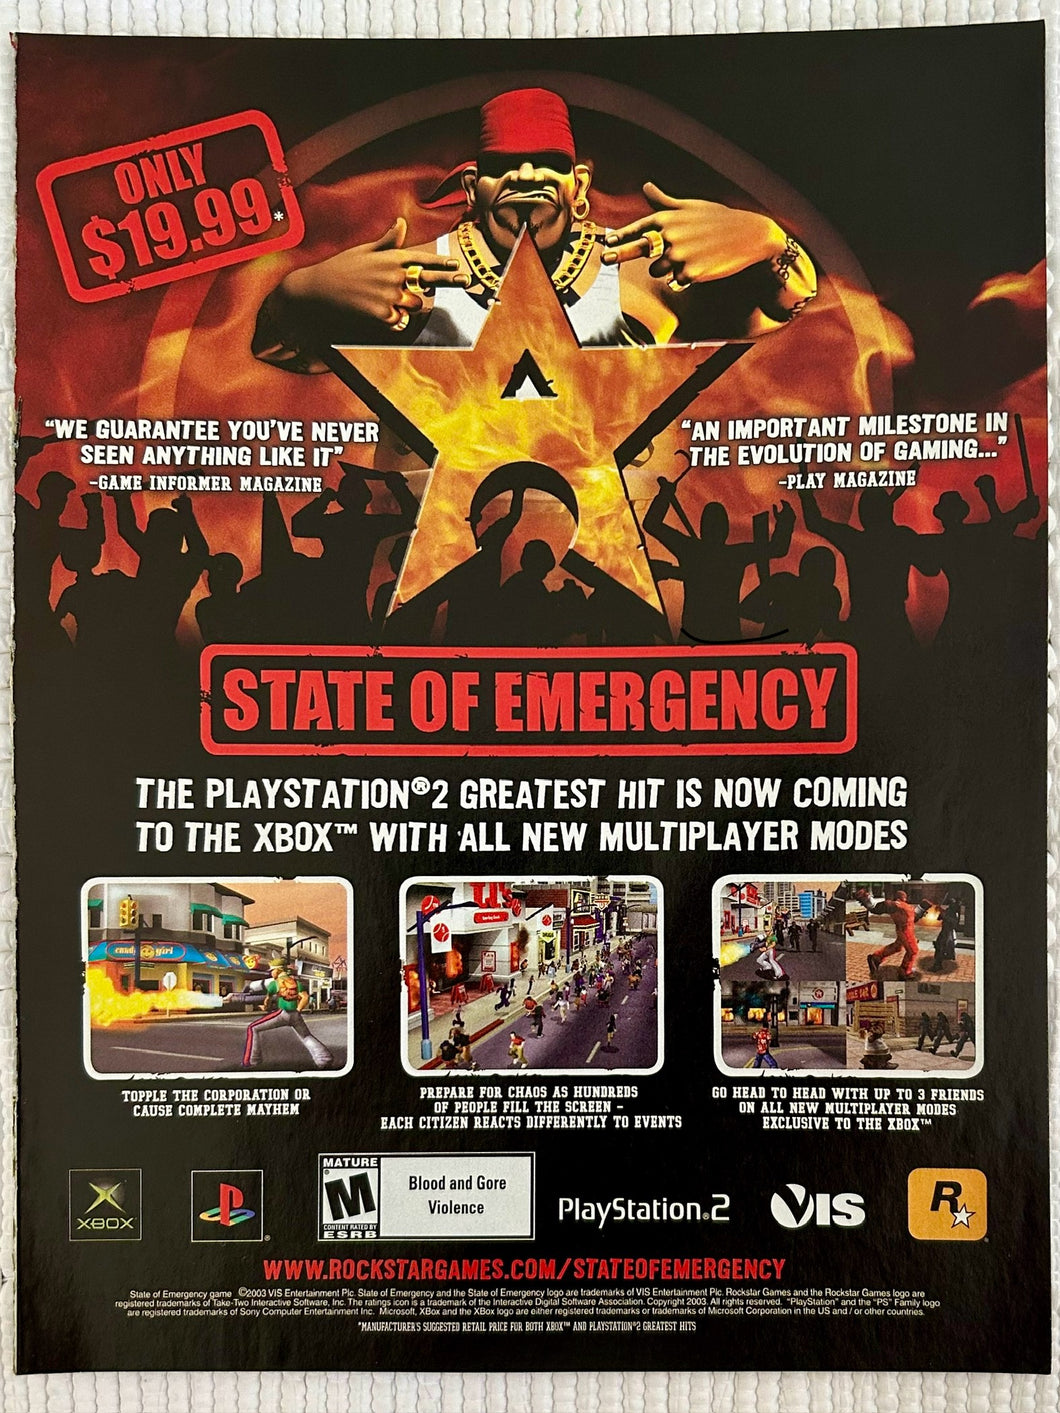 State of Emergency - PS2 Xbox - Original Vintage Advertisement - Print Ads - Laminated A4 Poster